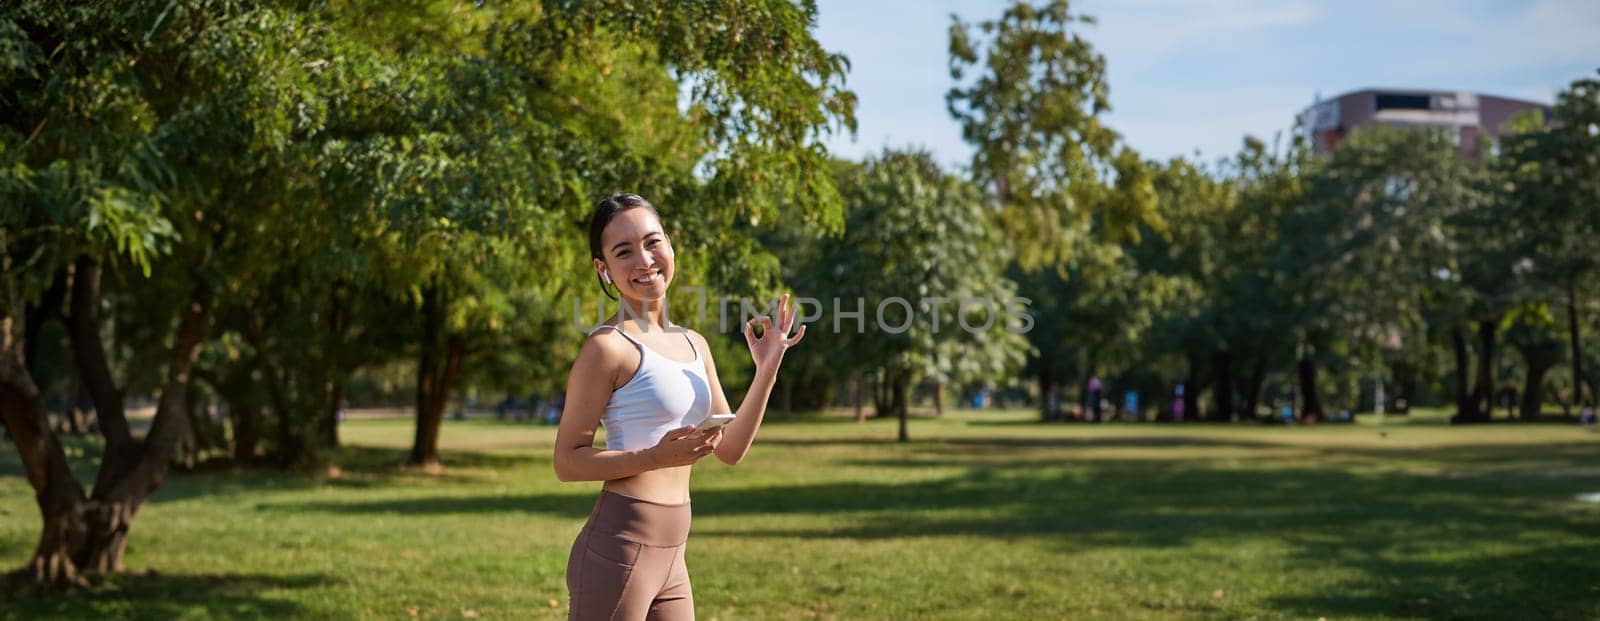 Sport and wellbeing. Young sportswoman in park, listen music and smiling, workout outdoors, jogging on streets of city.